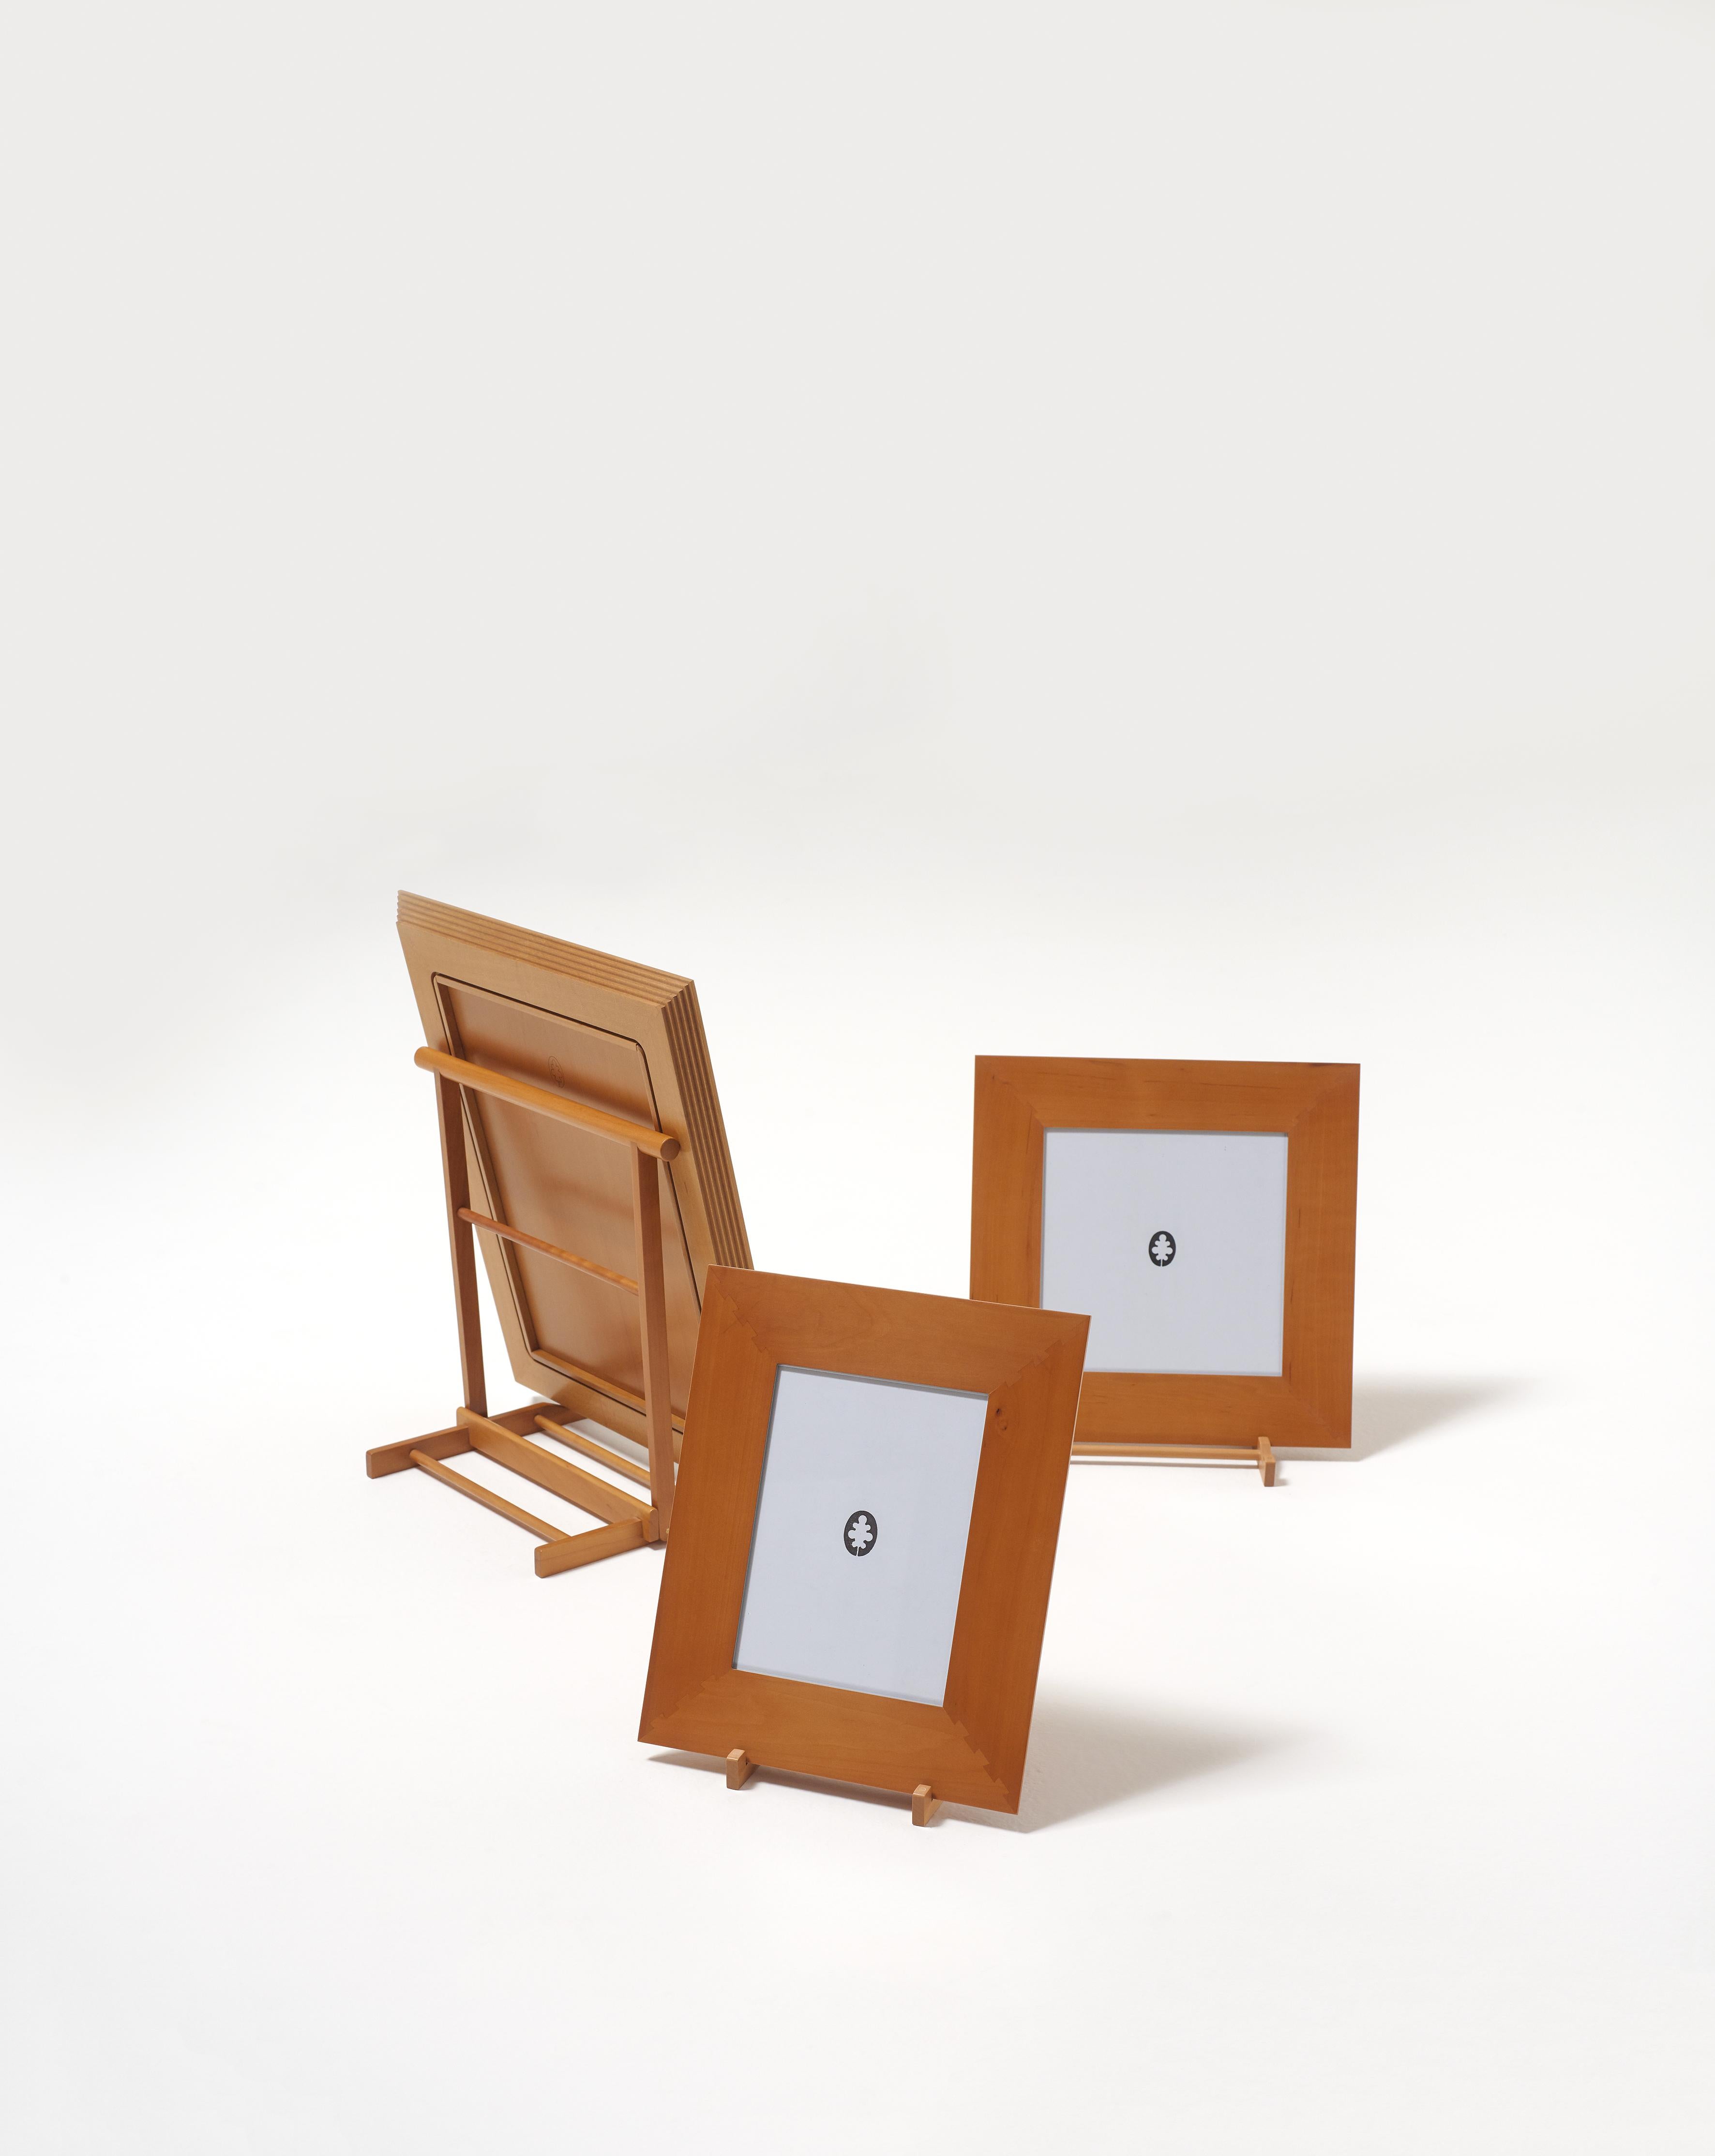 The Chevalet is an easel that was created in the Bottega Ghianda atelier in the 1980, from an original idea by Gae Aulenti for the Musée d’Orsay in Paris. It is a small folding structure made of jagged strips of solid wood, to be adjusted to fit the